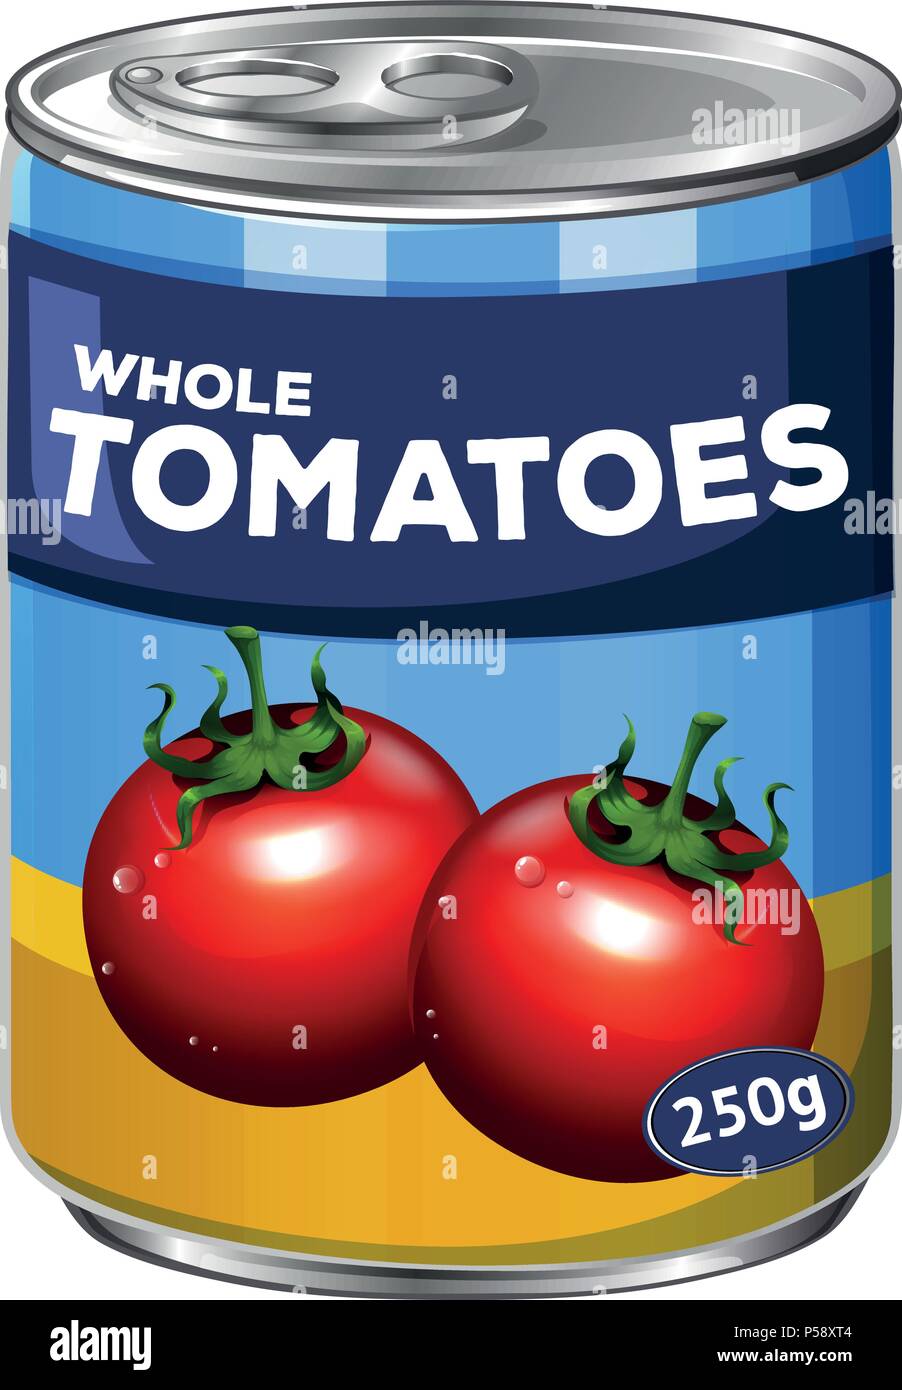 A Can of Whole Tomatoes illustration Stock Vector